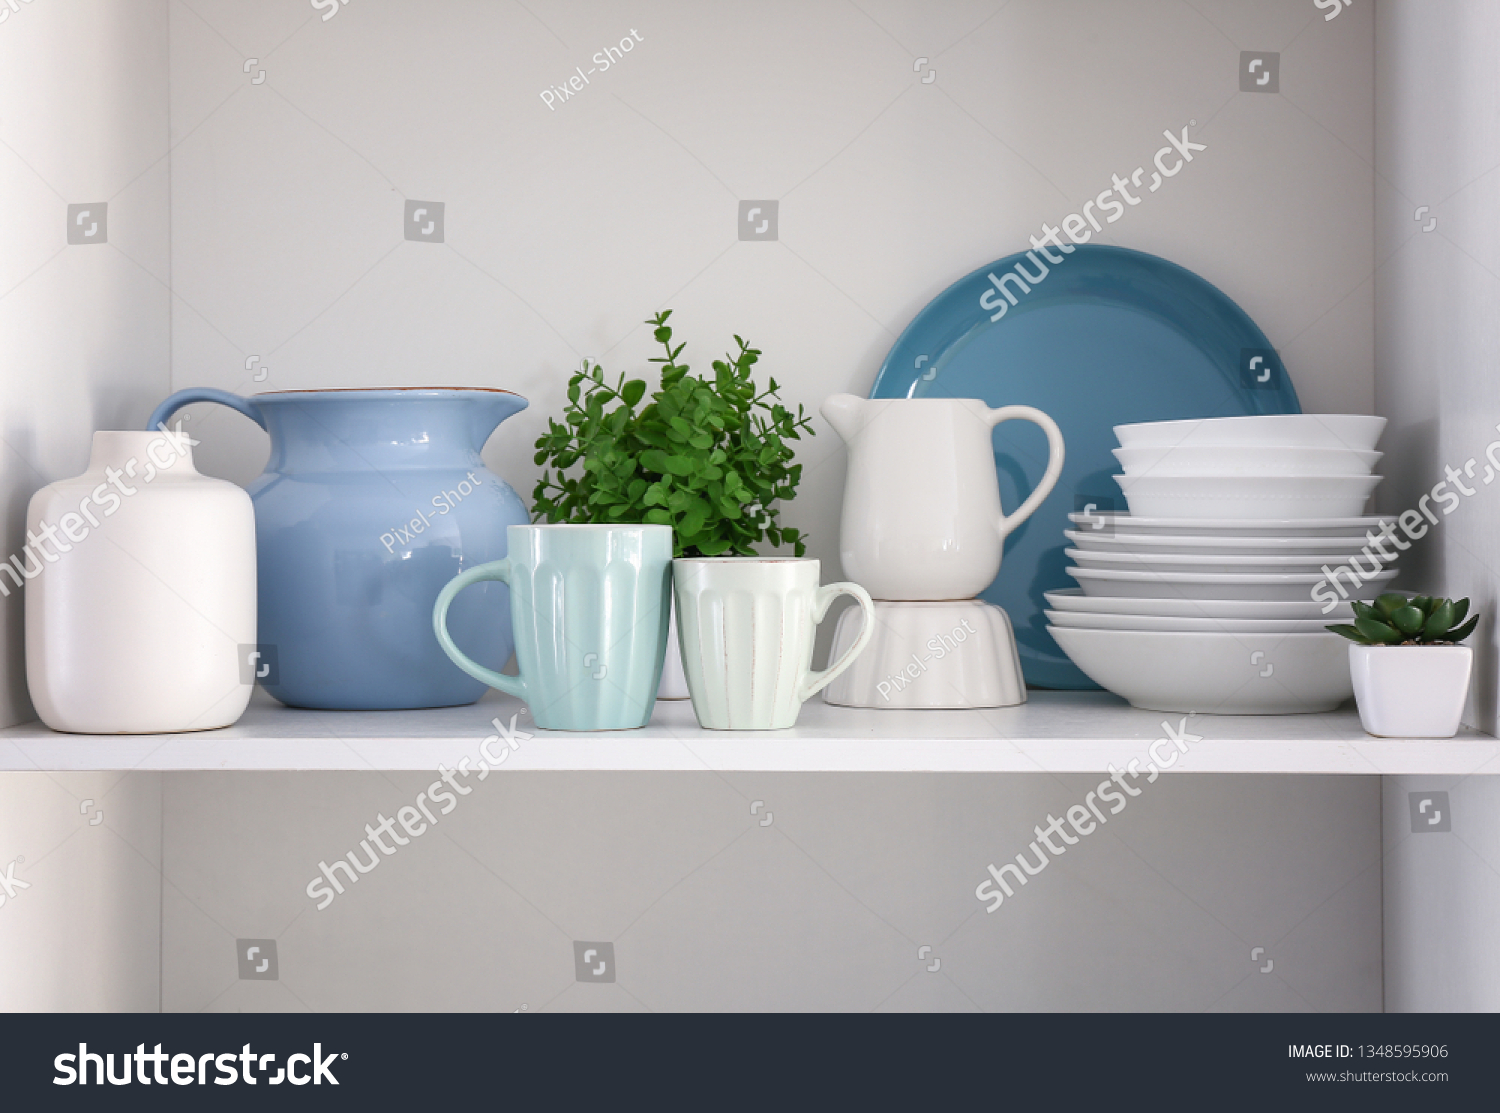 Shelf with clean dishes in kitchen #1348595906